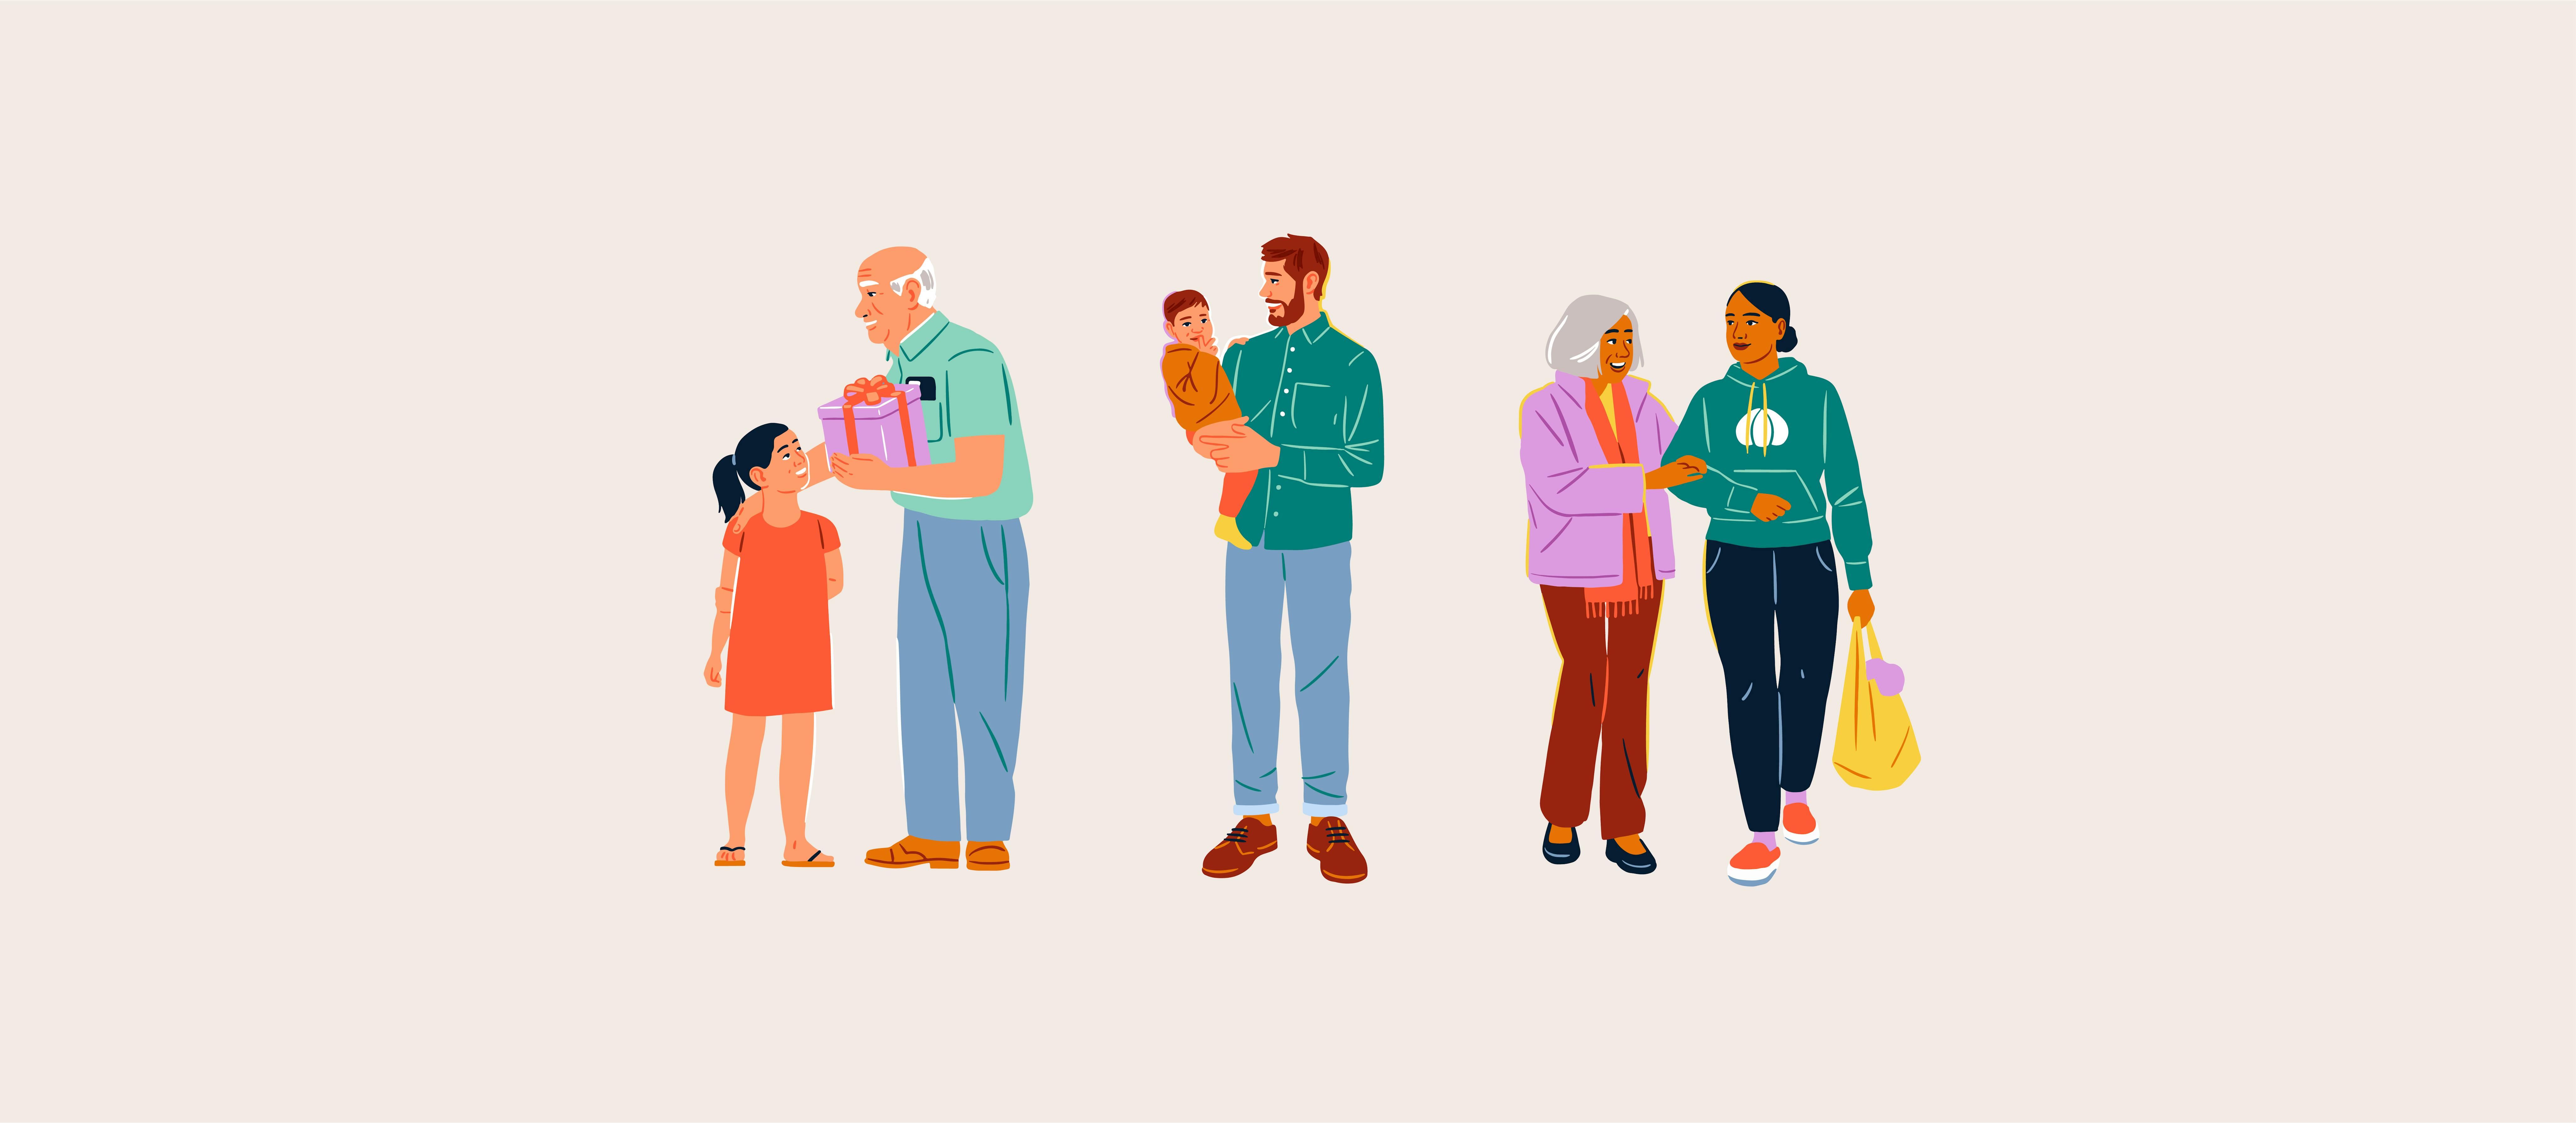 Illustration of a group of 6 people of different ages.